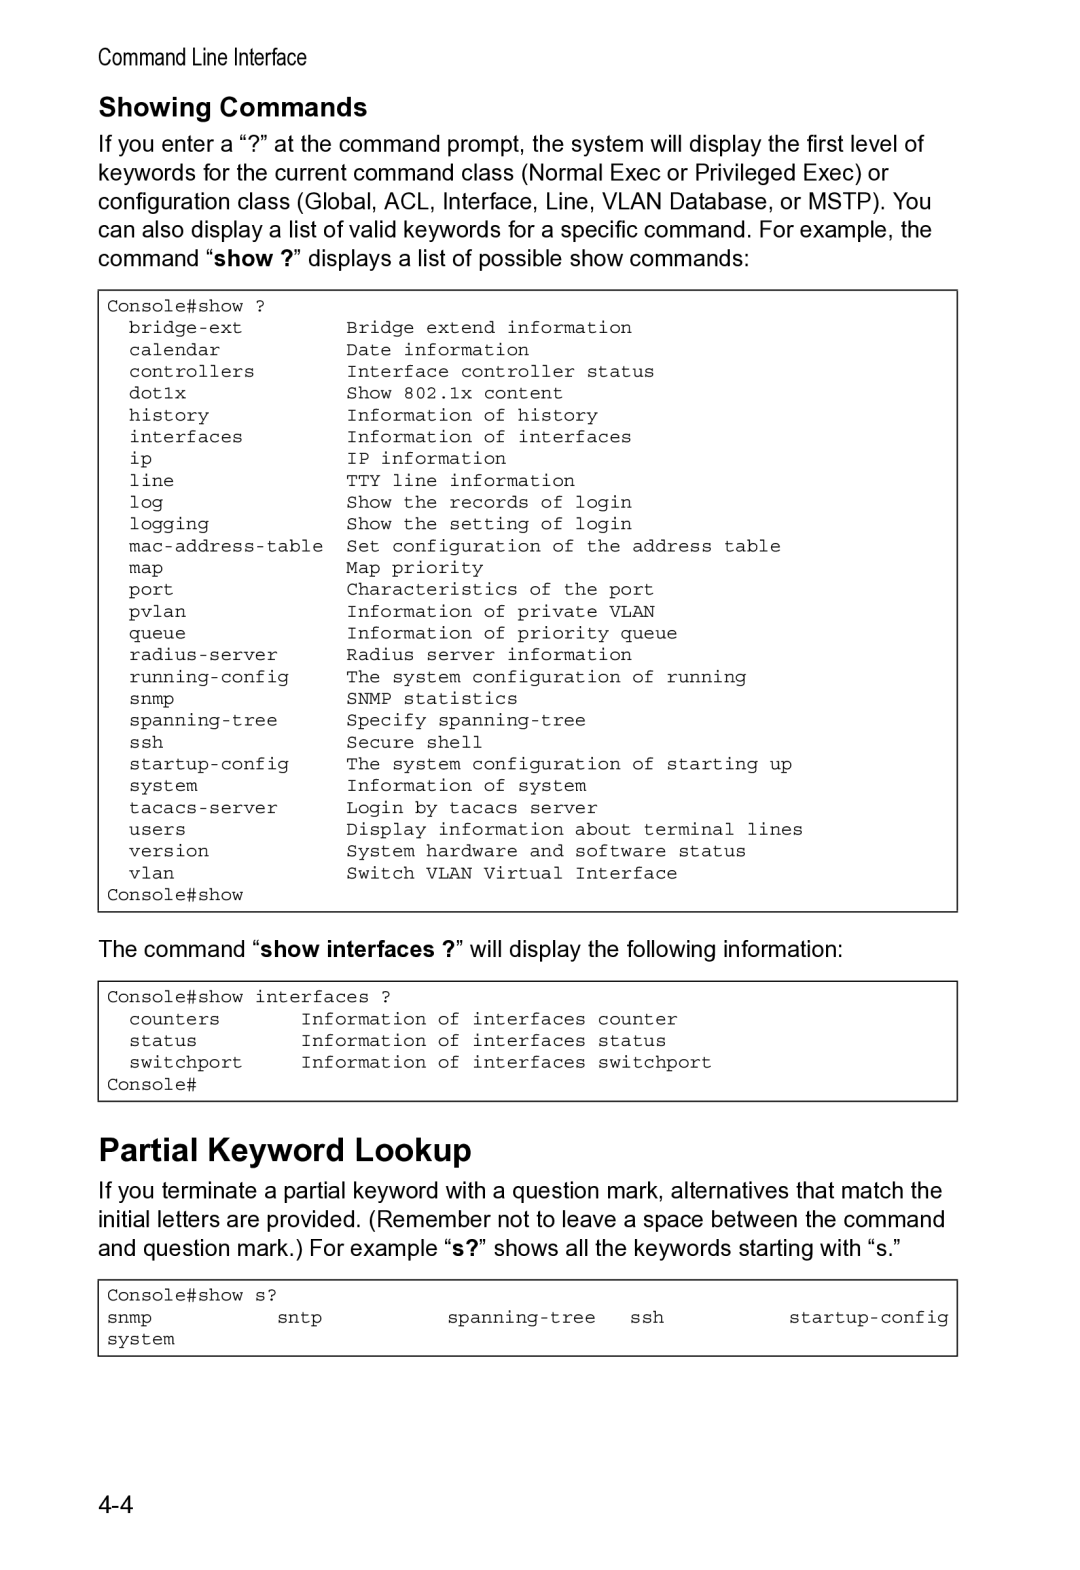 Accton Technology VS4512DC manual Partial Keyword Lookup, Showing Commands 